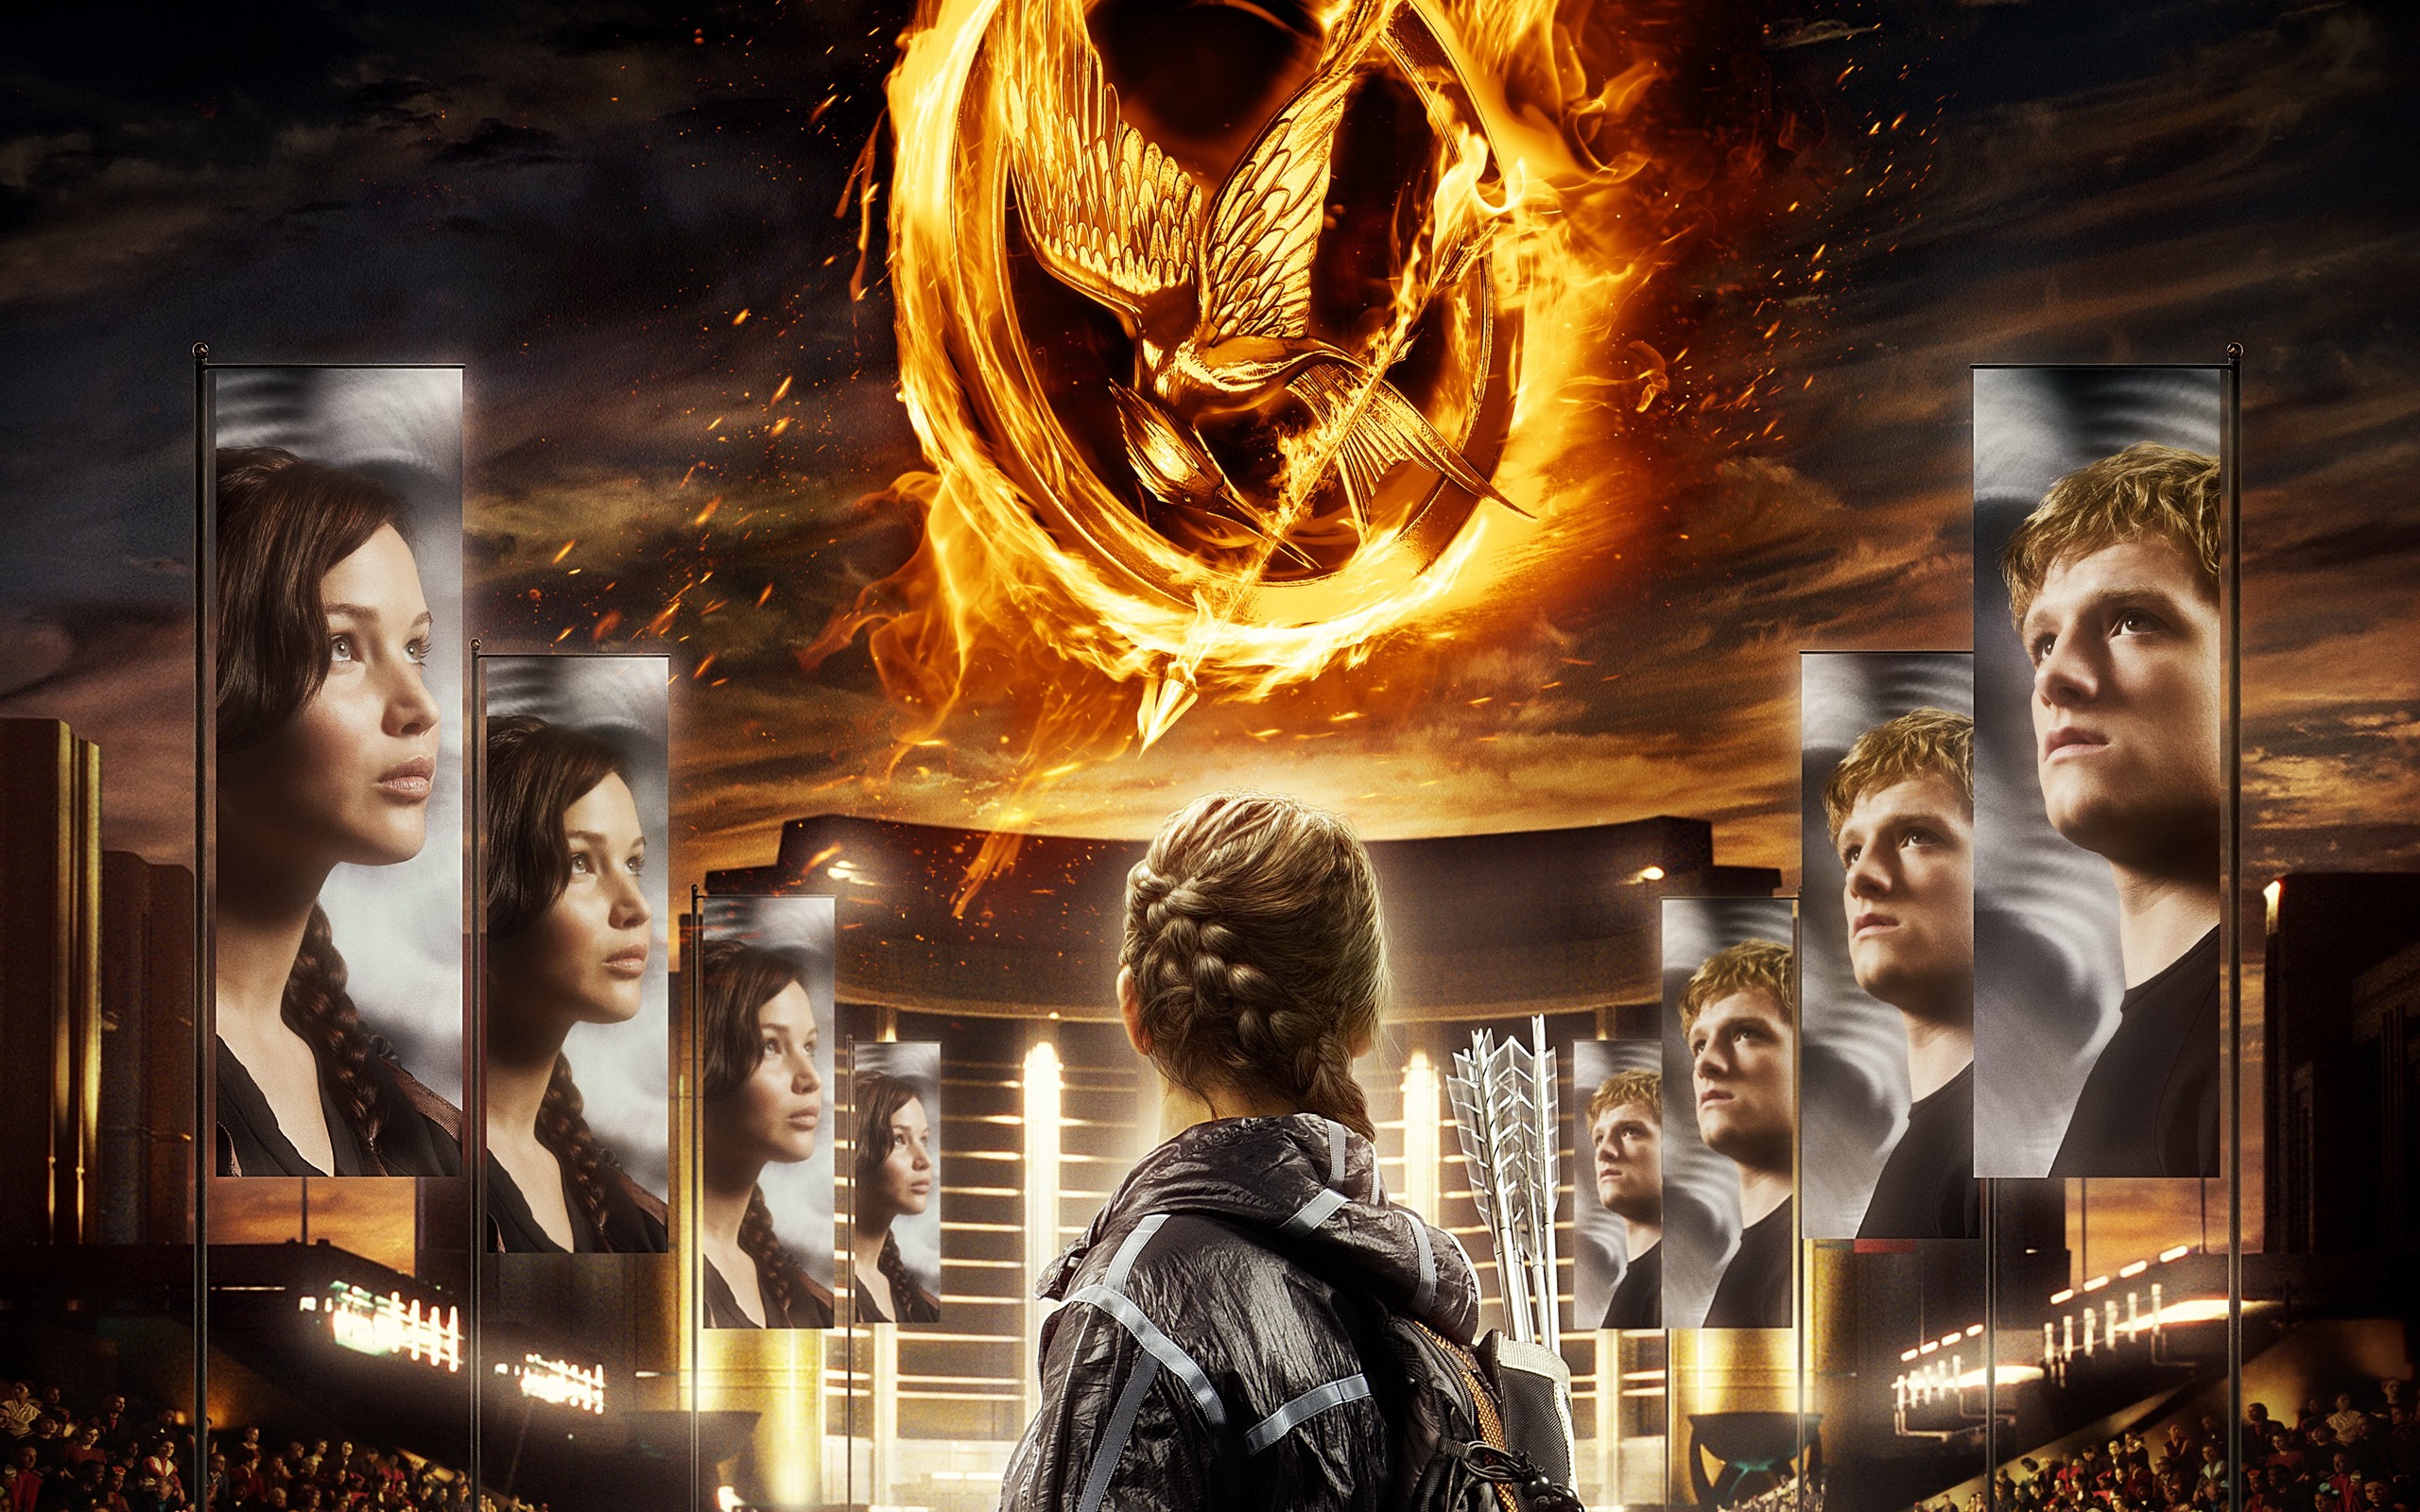 The Hunger Games HD wallpapers #1 - 2560x1600